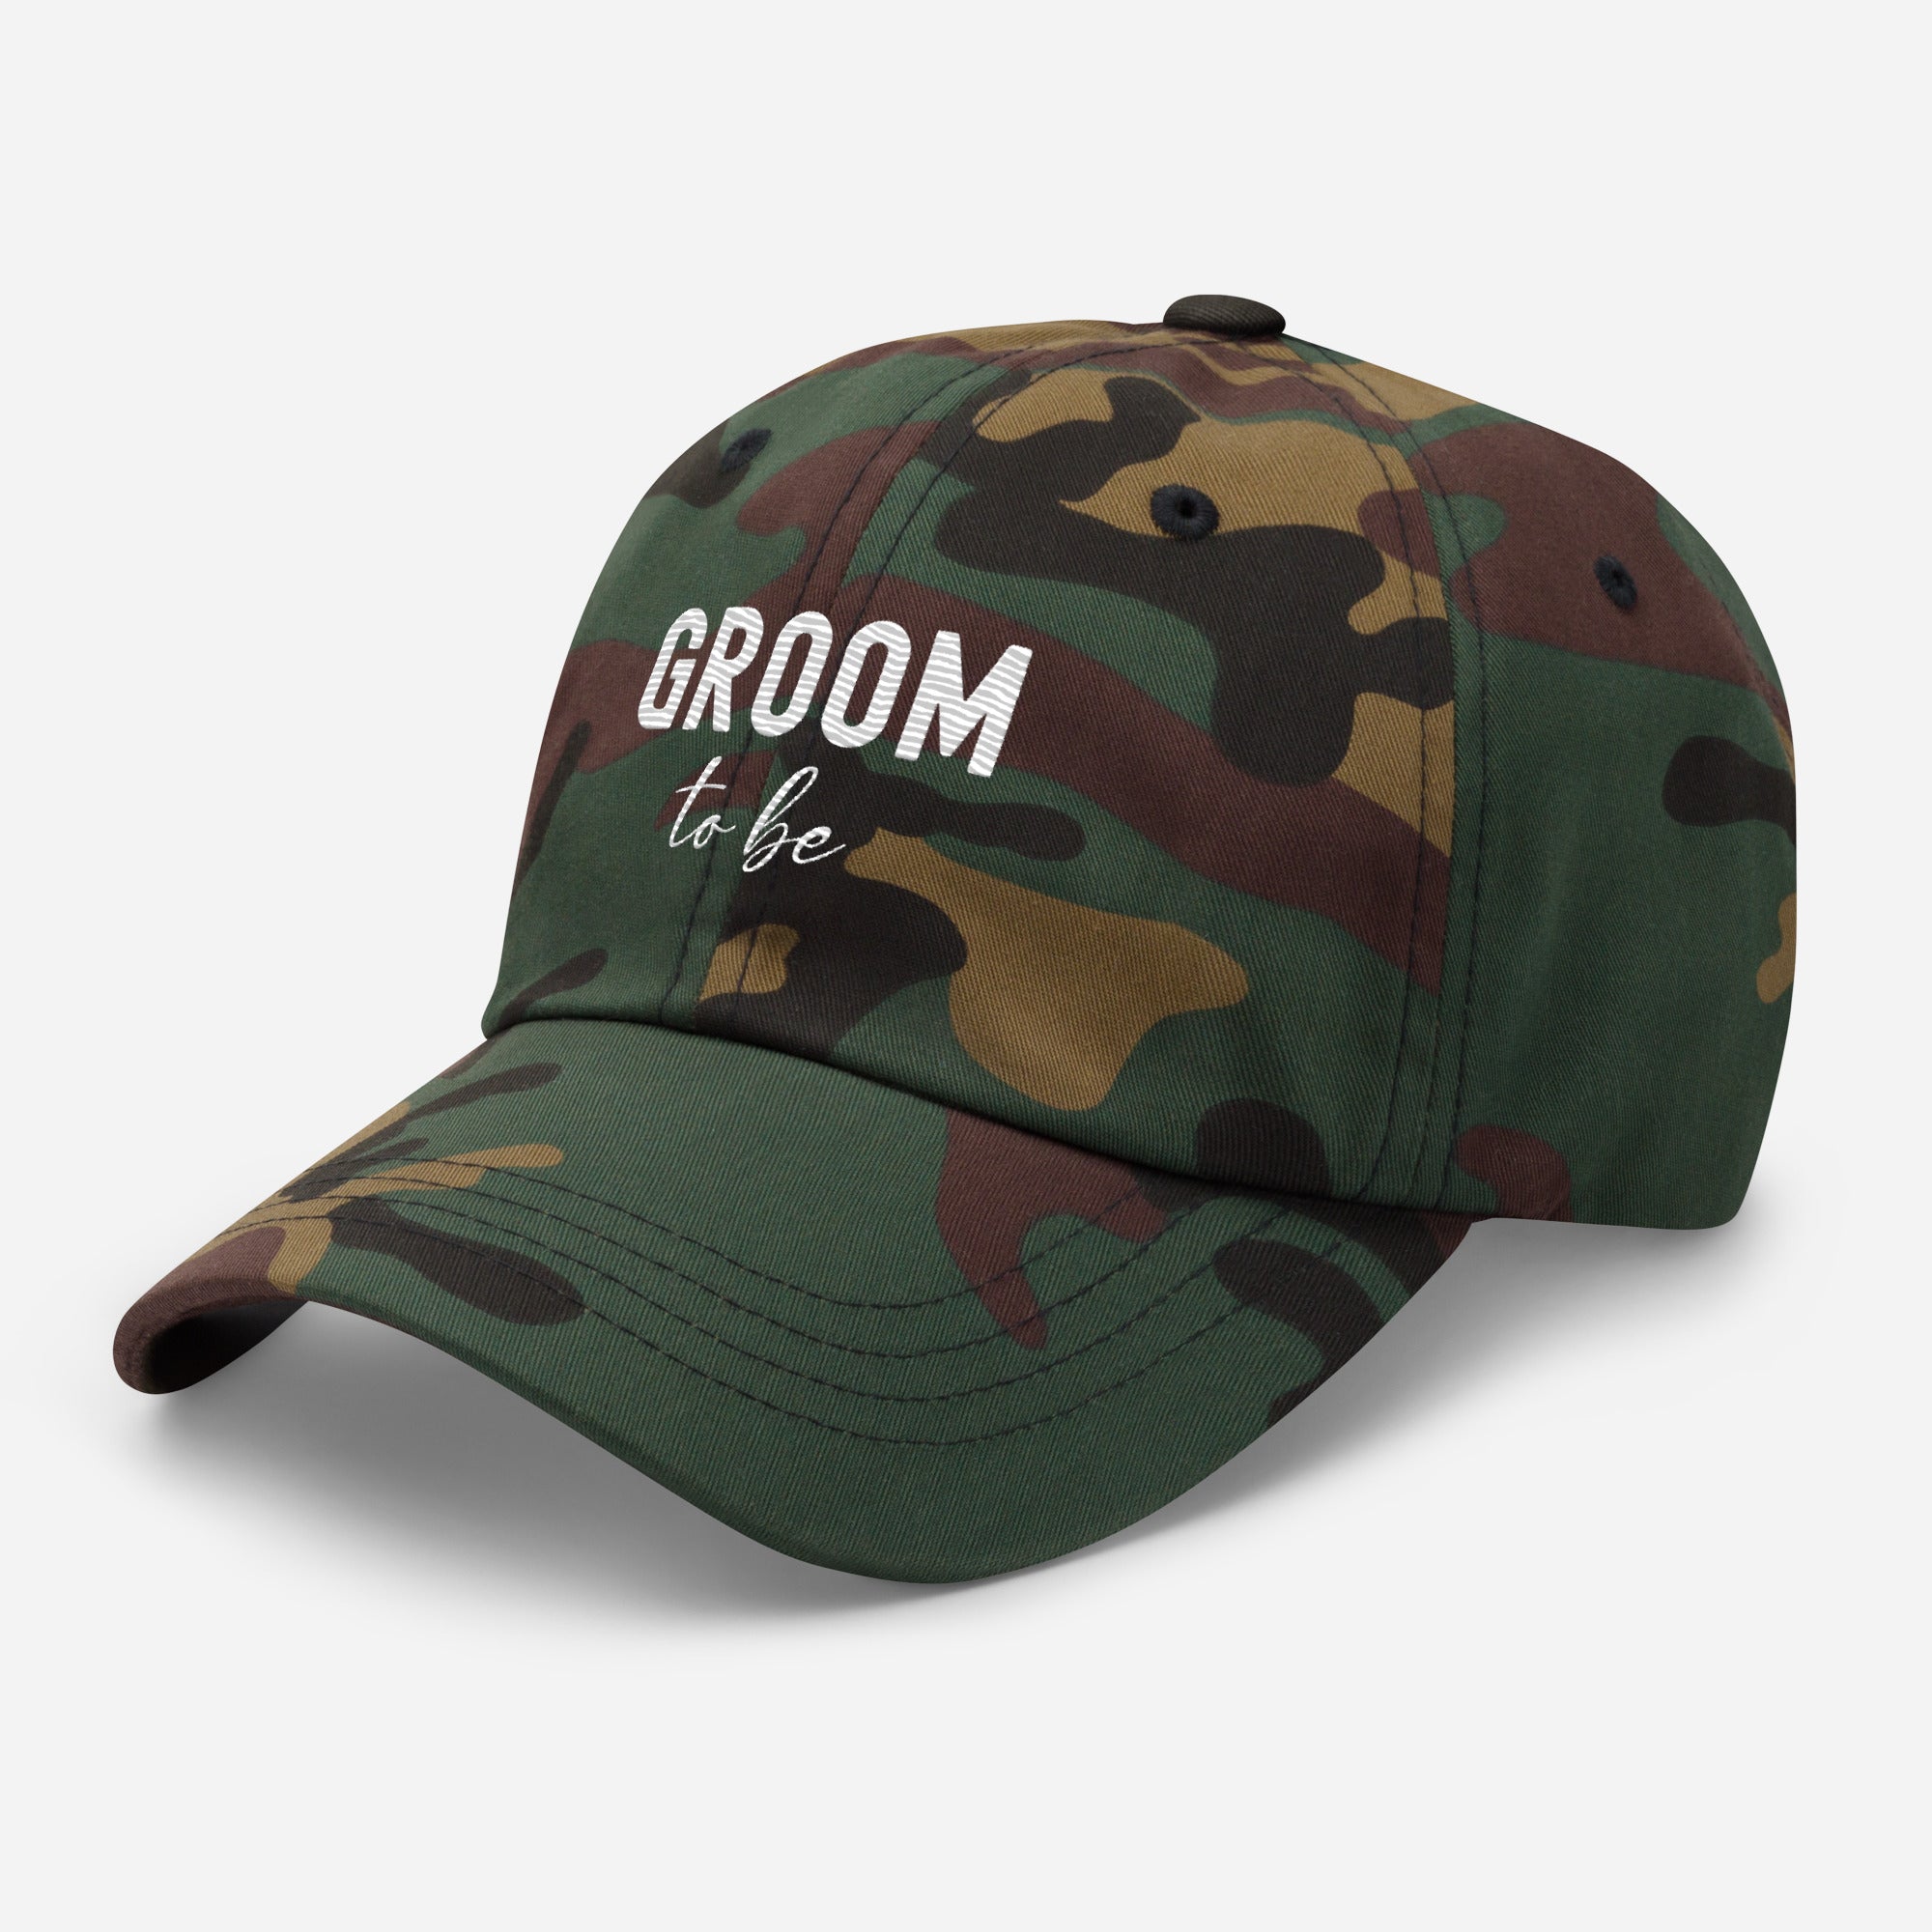 Hat | Groom to be